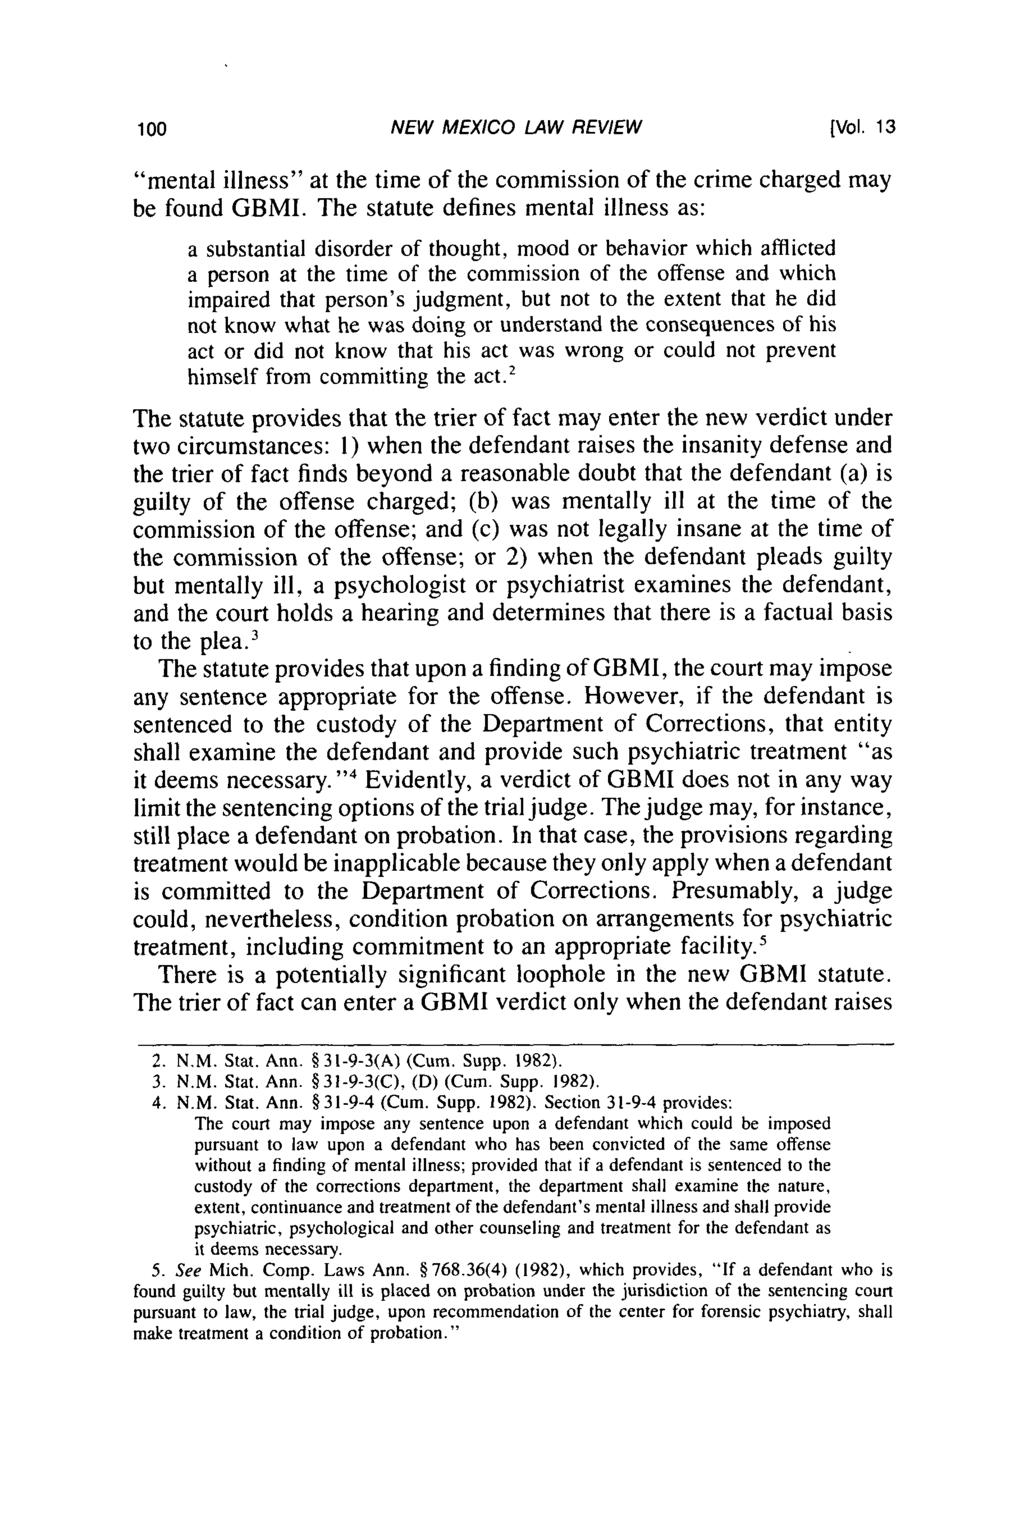 NEW MEXICO LAW REVIEW [Vol. 13 "mental illness" at the time of the commission of the crime charged may be found GBMI.